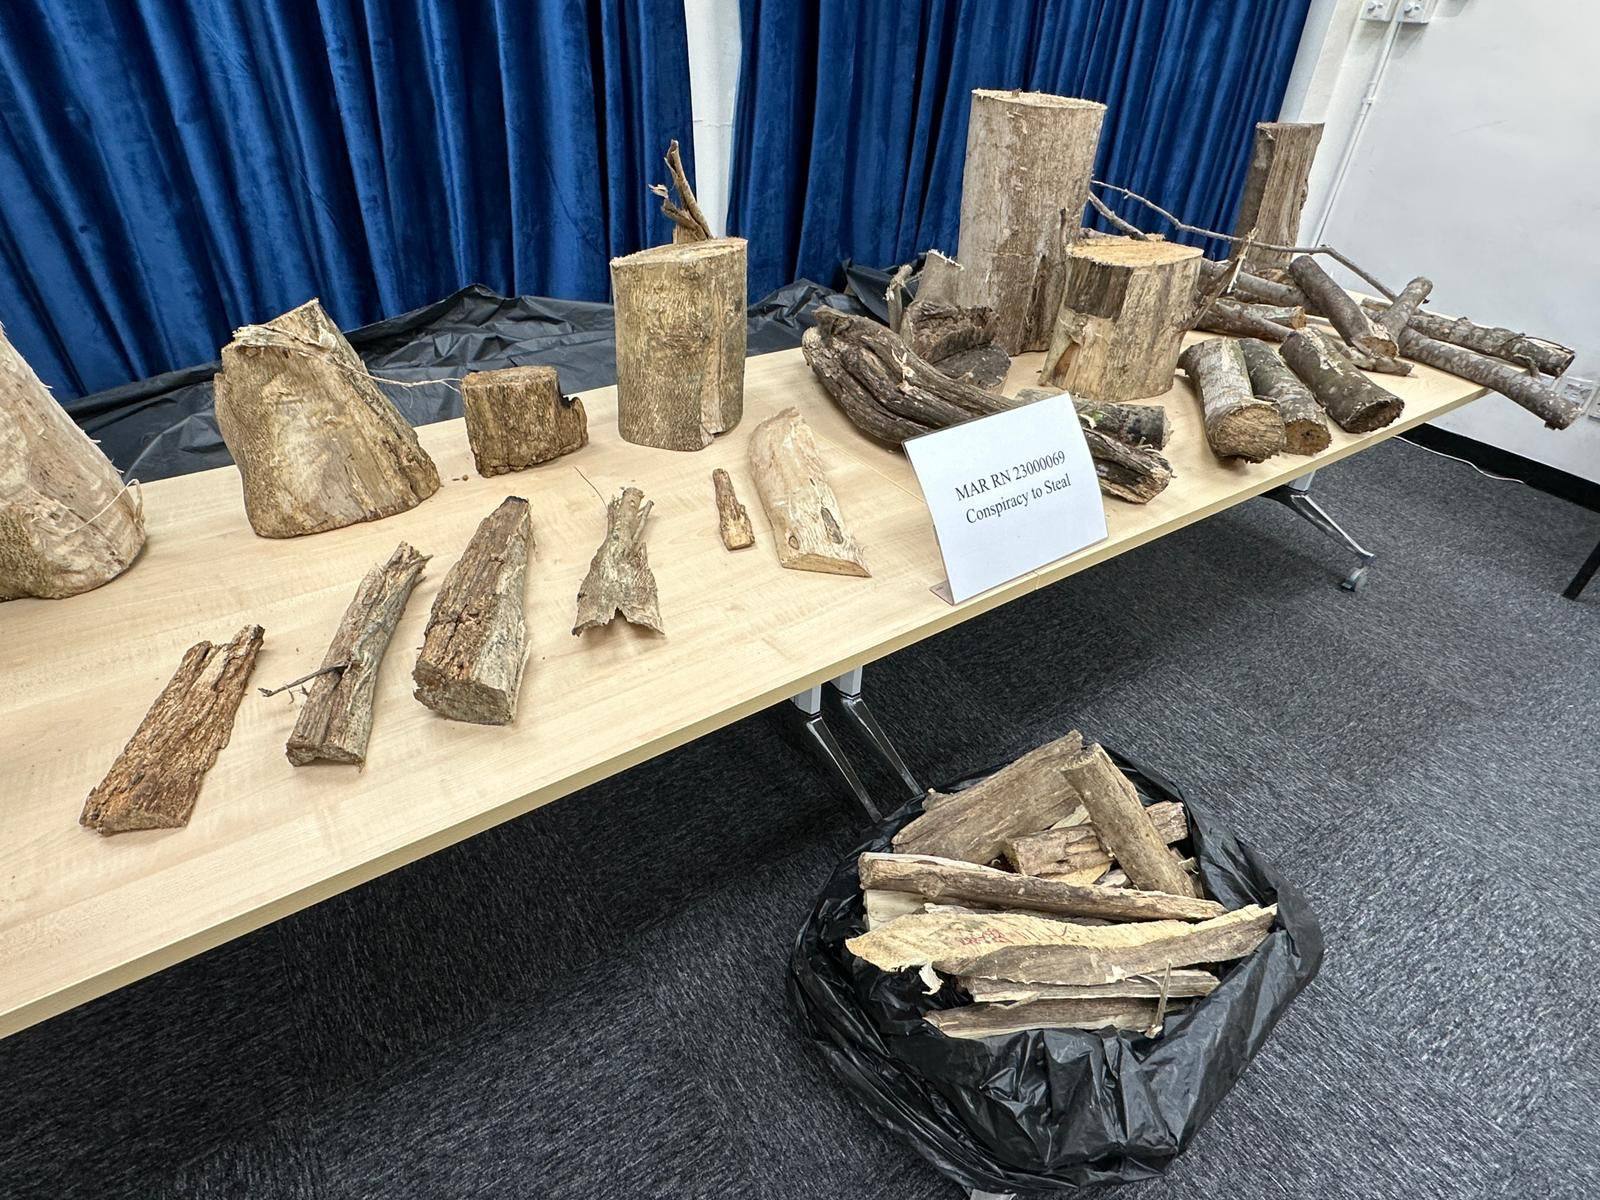 Police display the prized wood seized during the operation. The five suspects were arrested over conspiracy to steal. Photo: Handout